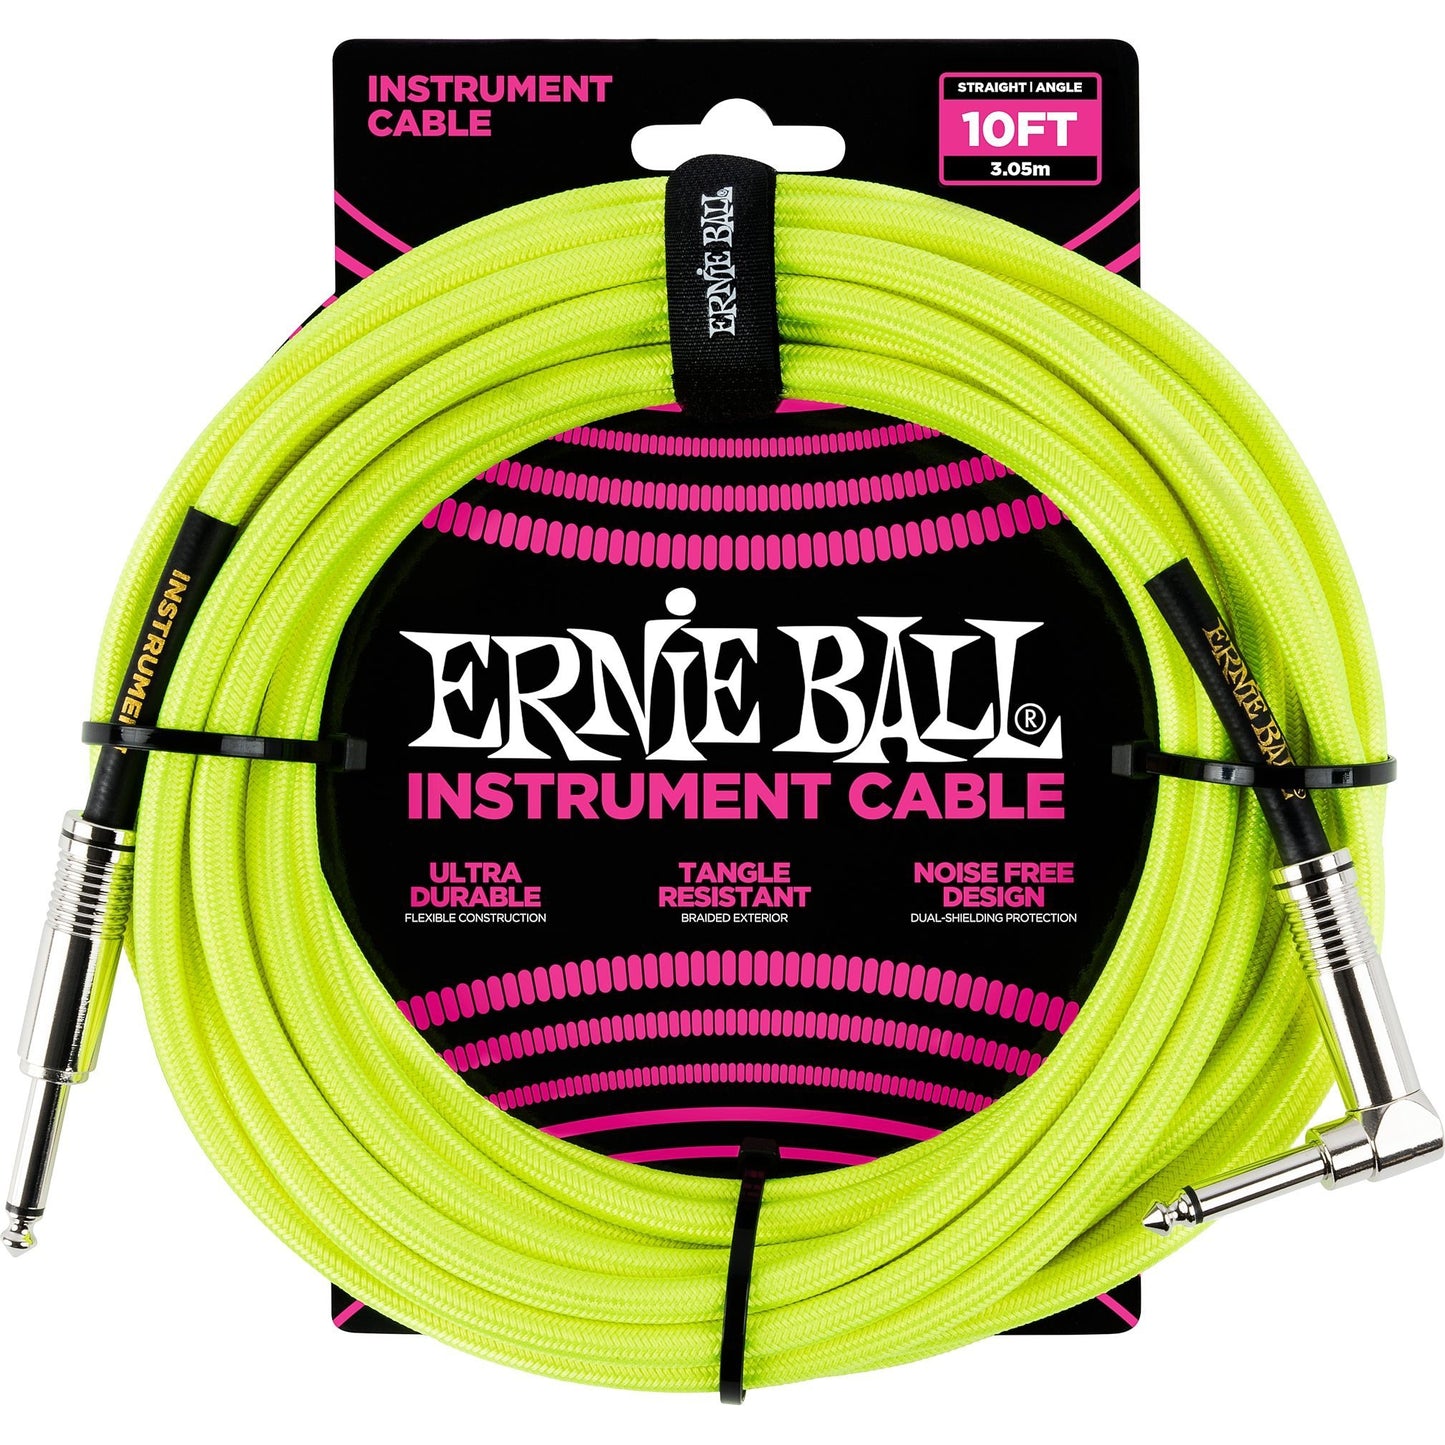 Ernie Ball Braided Instrument Cable, Neon Yellow, 10 Foot